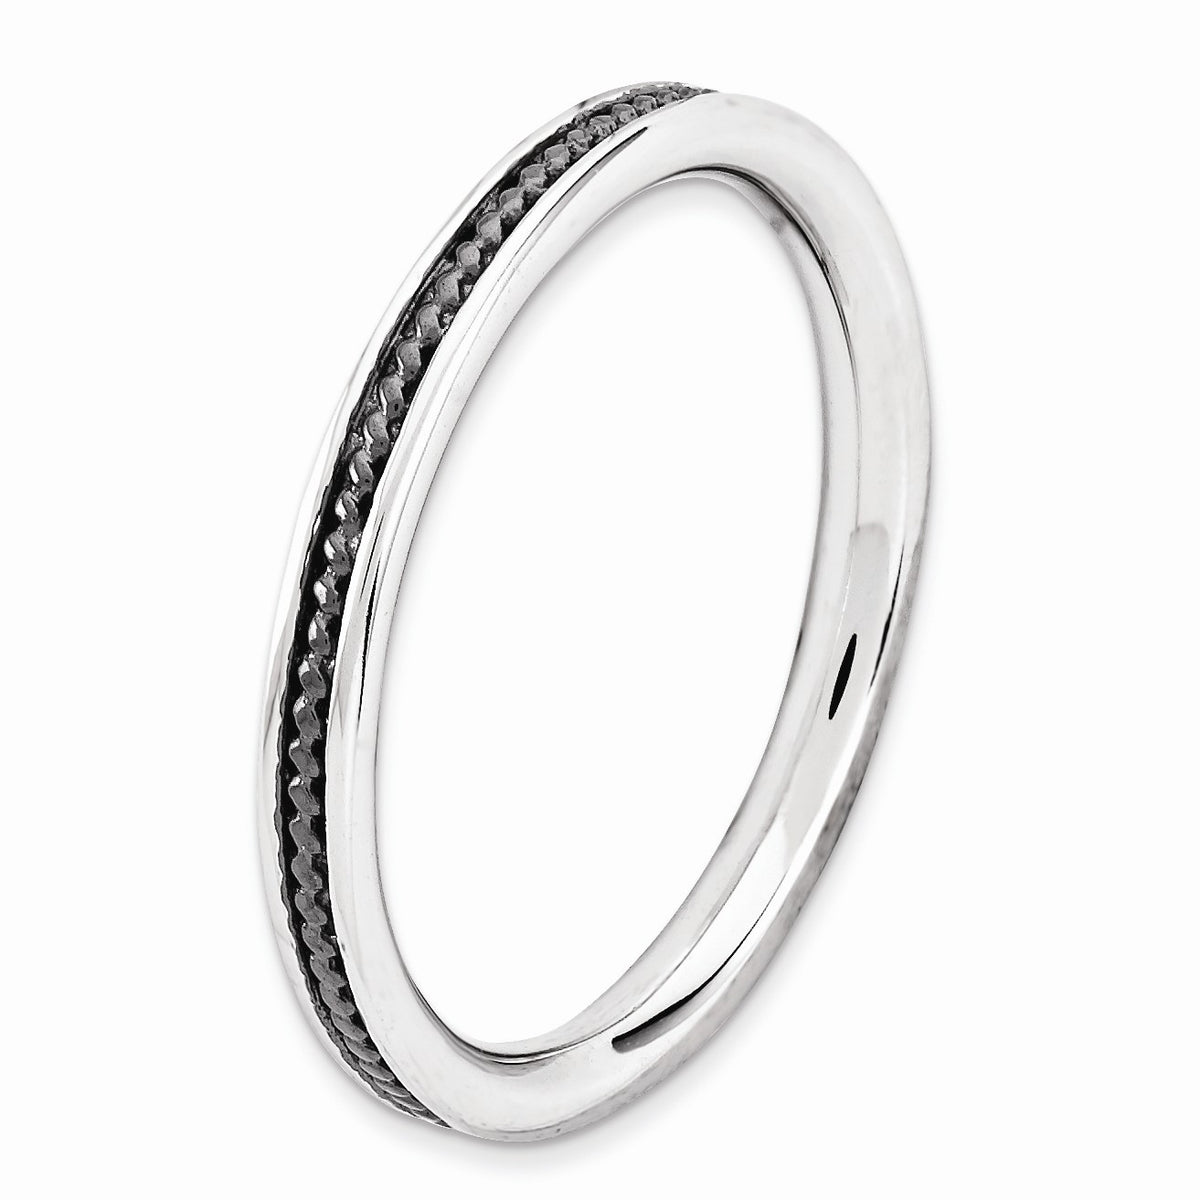 Alternate view of the 2.25mm Sterling Silver Stackable Black Ruthenium Plated Channeled Band by The Black Bow Jewelry Co.